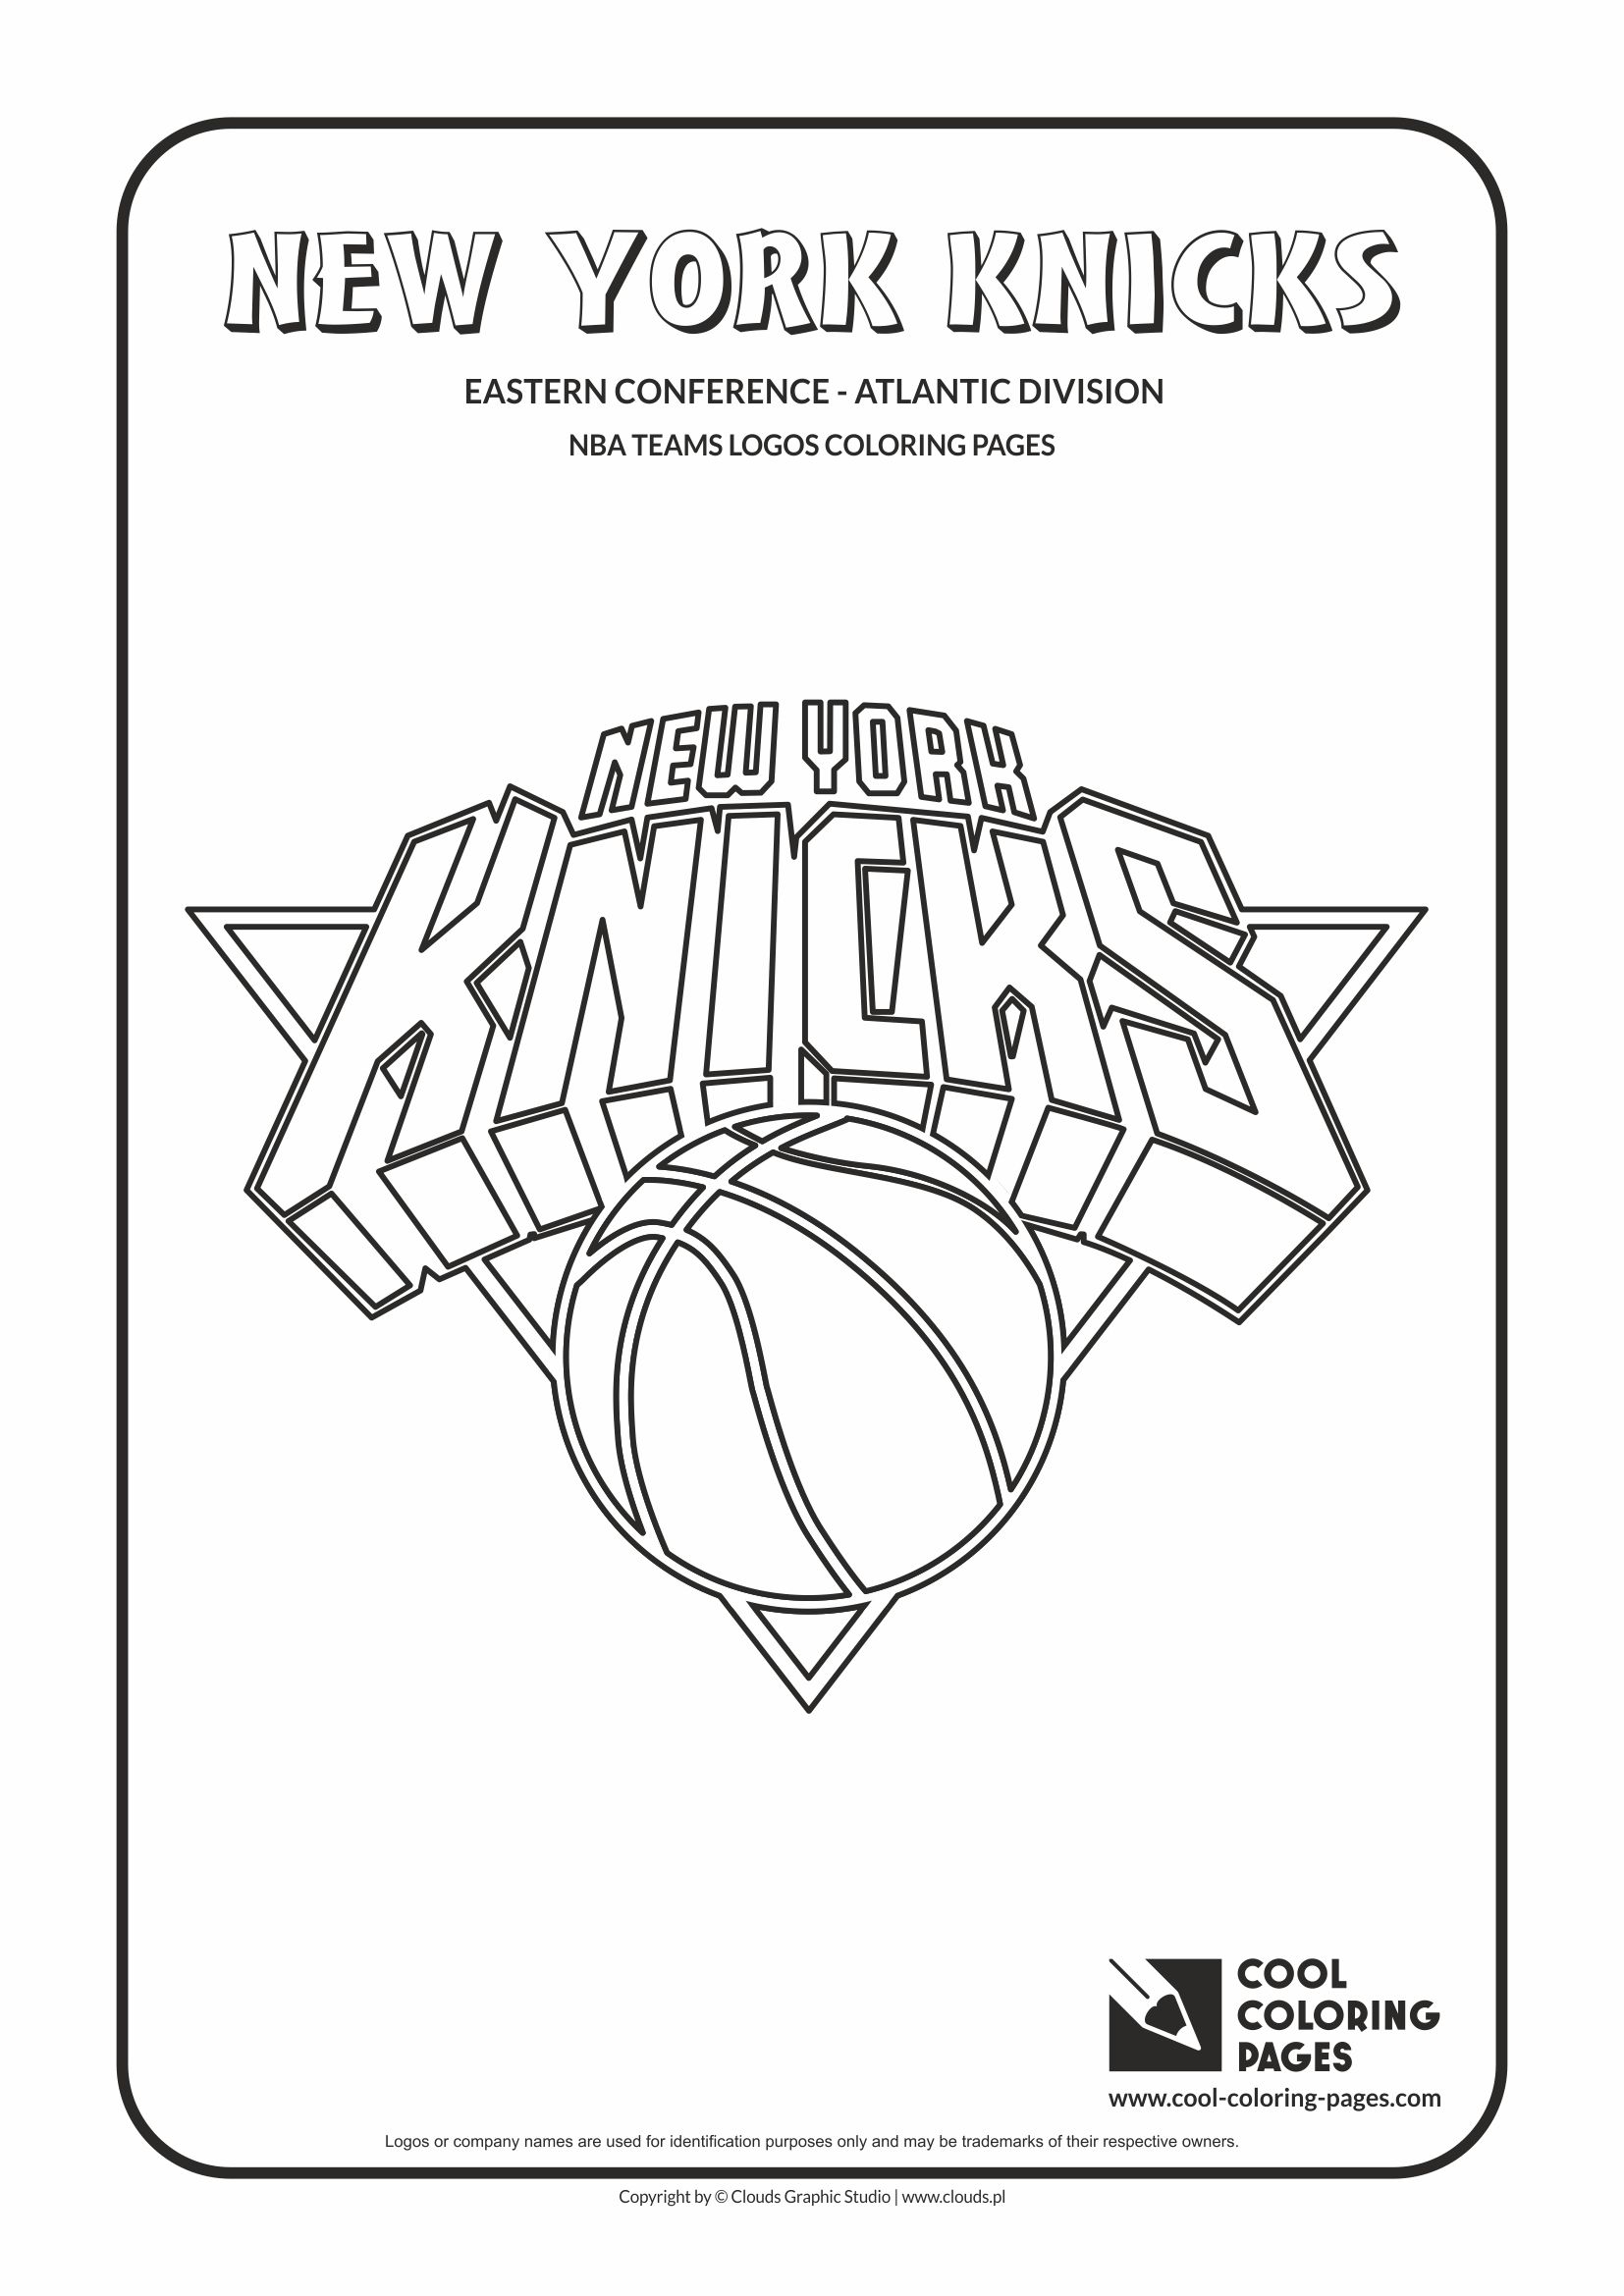 Cool coloring pages nba teams logos coloring pages